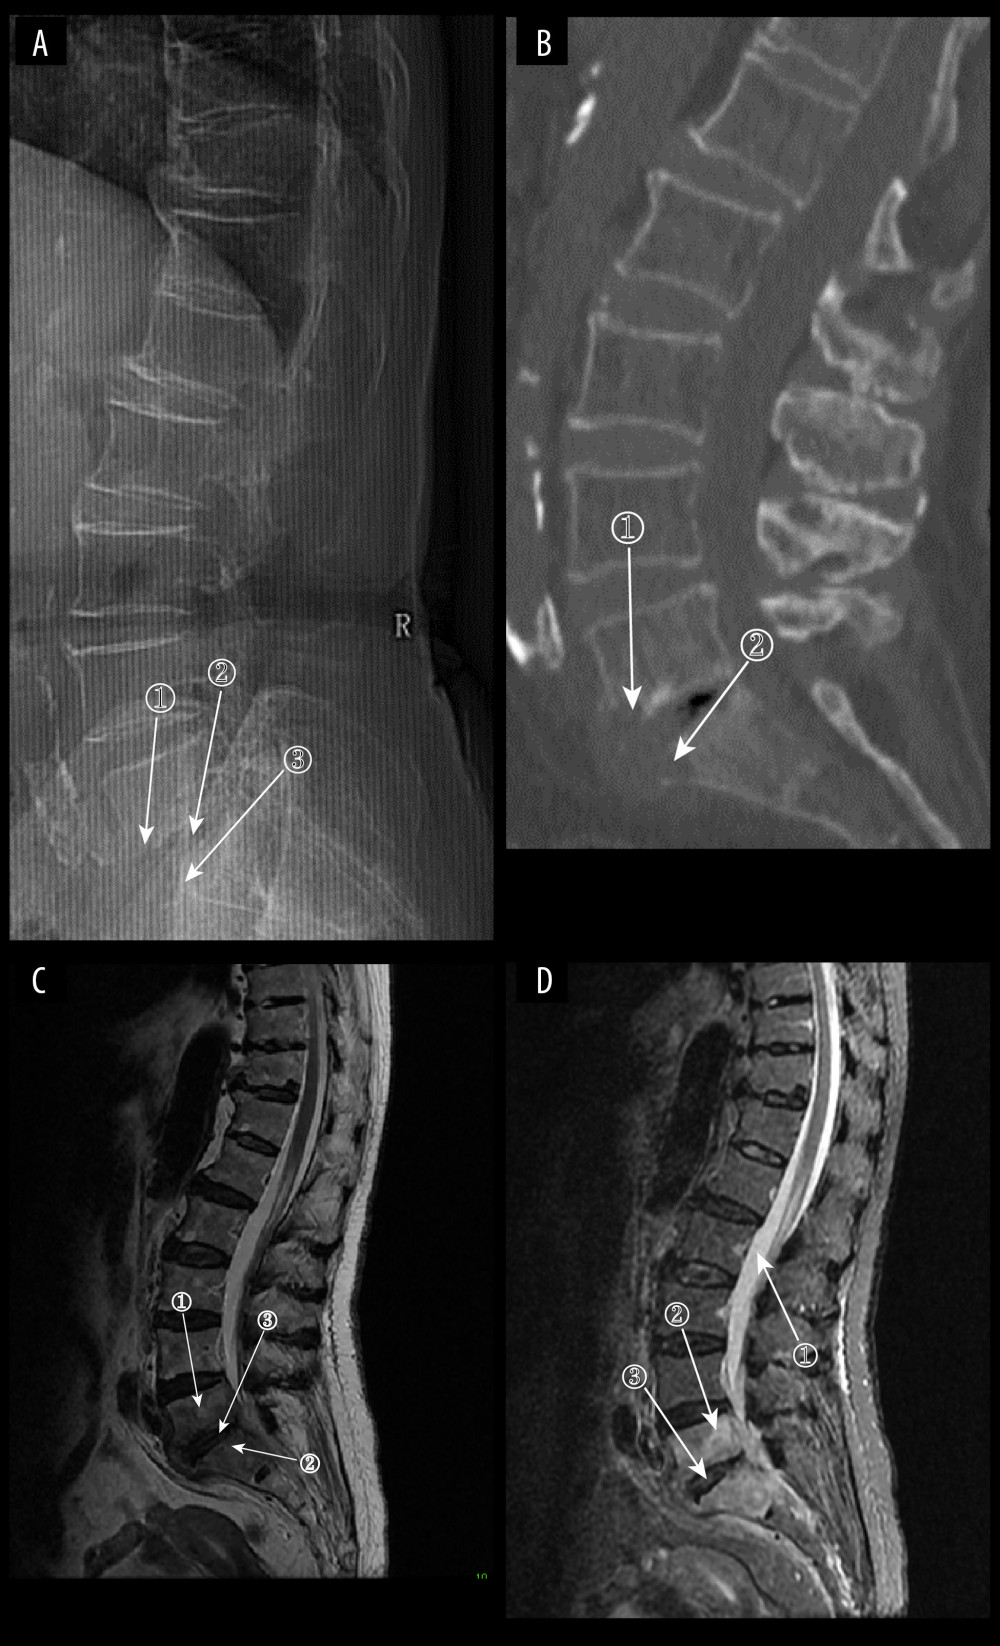 (A) Plain radiograph of early fungal spondylitis (FS). Markers 1 and 3 show localized bone destruction at L5–S1, and marker 2 shows no significant narrowing of the intervertebral space. (A–C) Images of the same patient, who had an interval of approximately 30 days between the onset of symptoms and the time of the radiographs. (B) Plain computed tomography in early FS. Bone destruction is seen in the margins of the L5–S1 vertebrae at markers 1 and. (C) Magnetic resonance imaging (MRI) in early stages of FS. This image is a T2WI sequence. A small intraosseous abscess is shown at marker 1, a striated shadow under the vertebral endplate is shown at marker 2, and an infected disc is shown at marker. (D) MRI in early stages of FS. This image is a short Tau inversion recovery (STIR) sequence. Density at marker 1 is 376, marker 2 shows diffuse high signal in the vertebral body with a density of 312, which is lower than the cerebrospinal fluid density value, and marker 3 shows a relatively preserved intervertebral space height (ITK-SNAP. Version 4.0.2. Paul Yushkevich, Jilei Hao, Alison Pouch, Sadhana Ravikumar et al at the Penn Image Computing and Science Laboratory; Adobe Illustrator 2022. 26.5. Adobe Inc.).